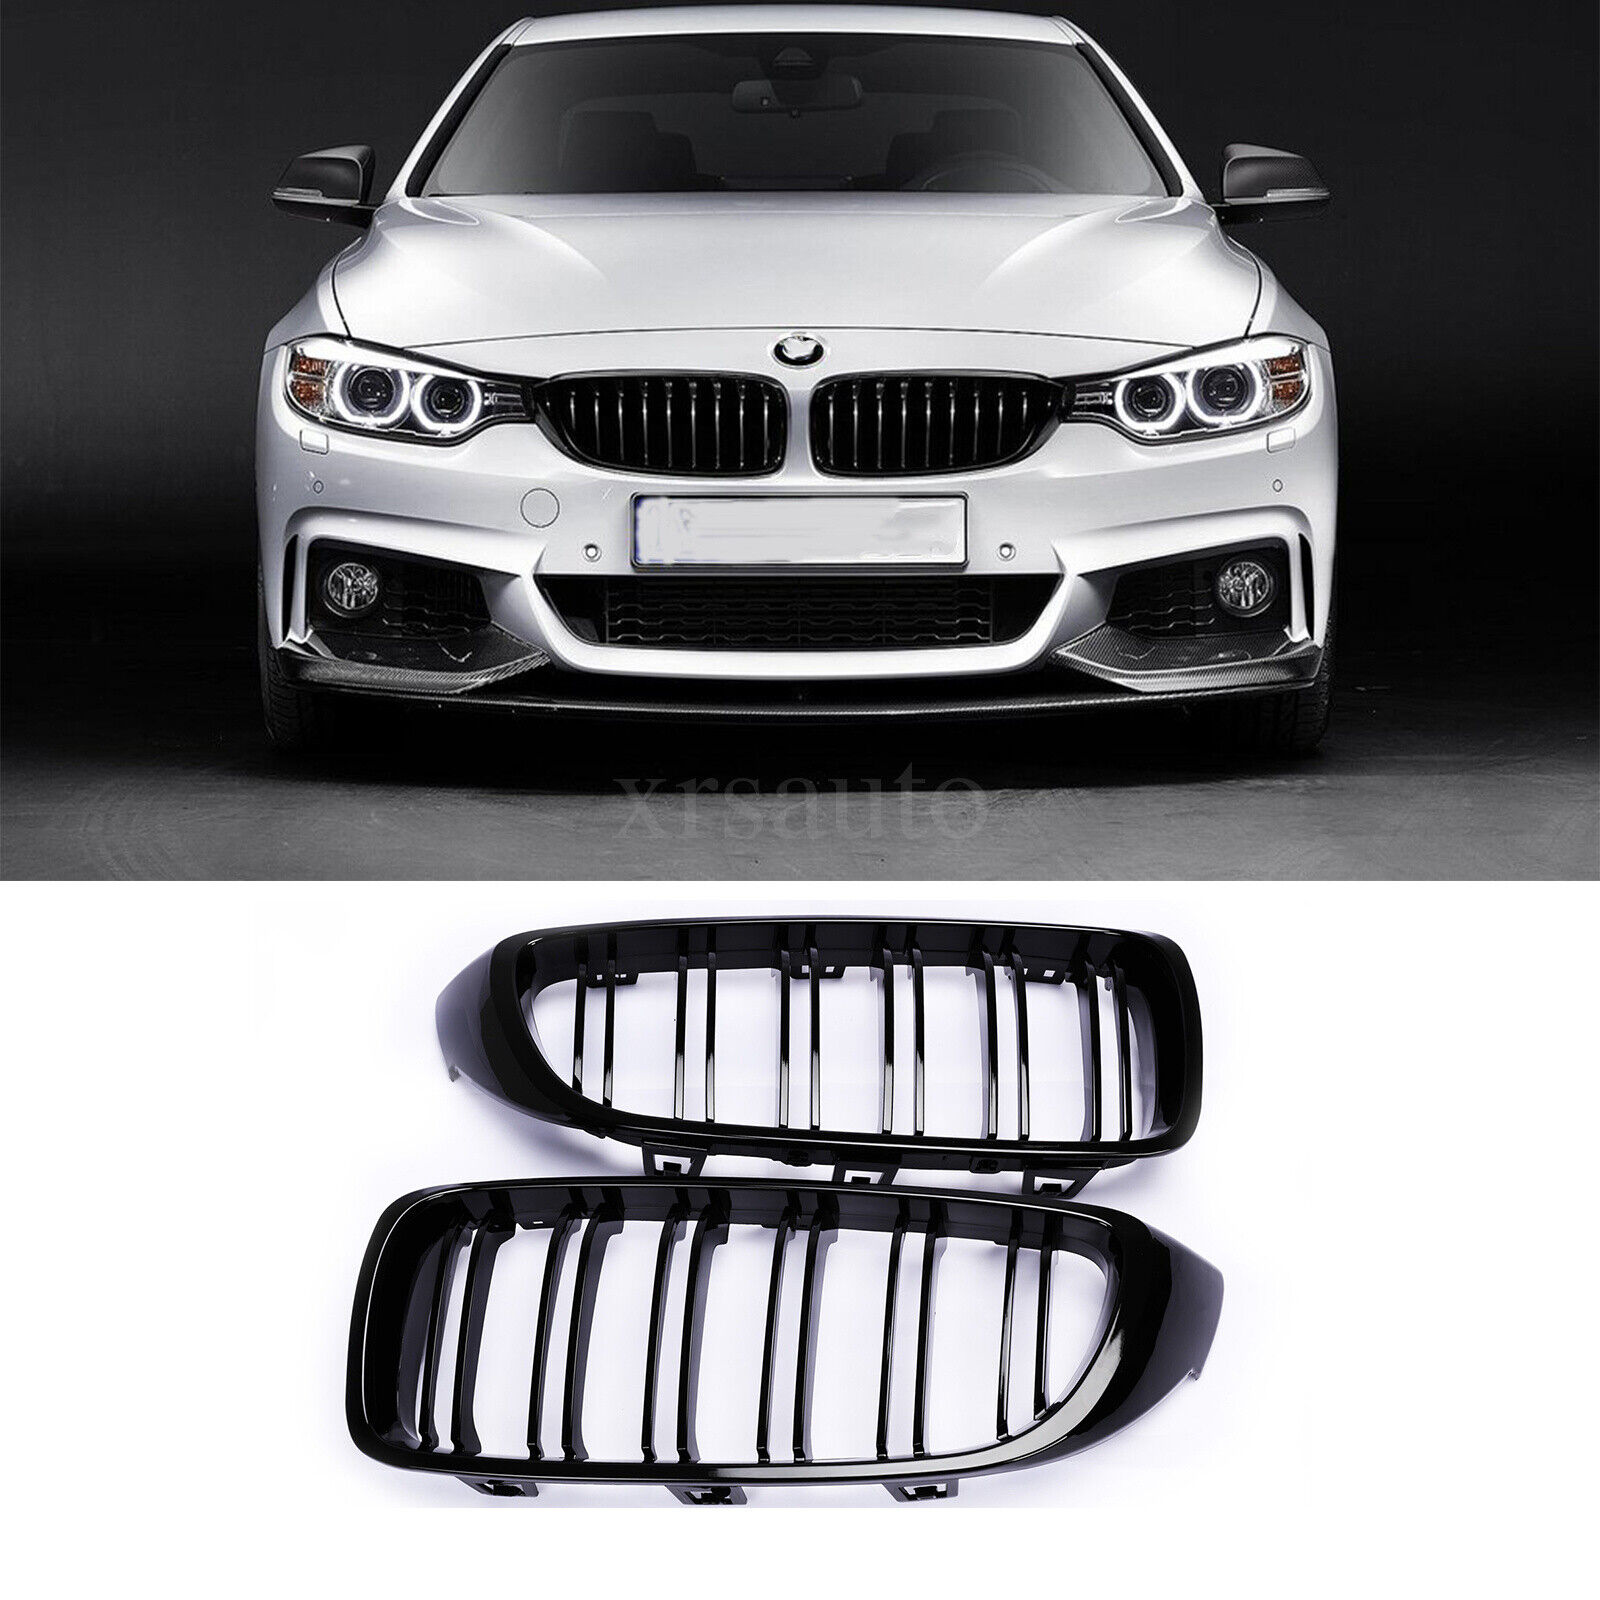 Gloss Black Kidney Grille Twin Bar For BMW 4 Series F32 F33 F36 M4 2014-2020